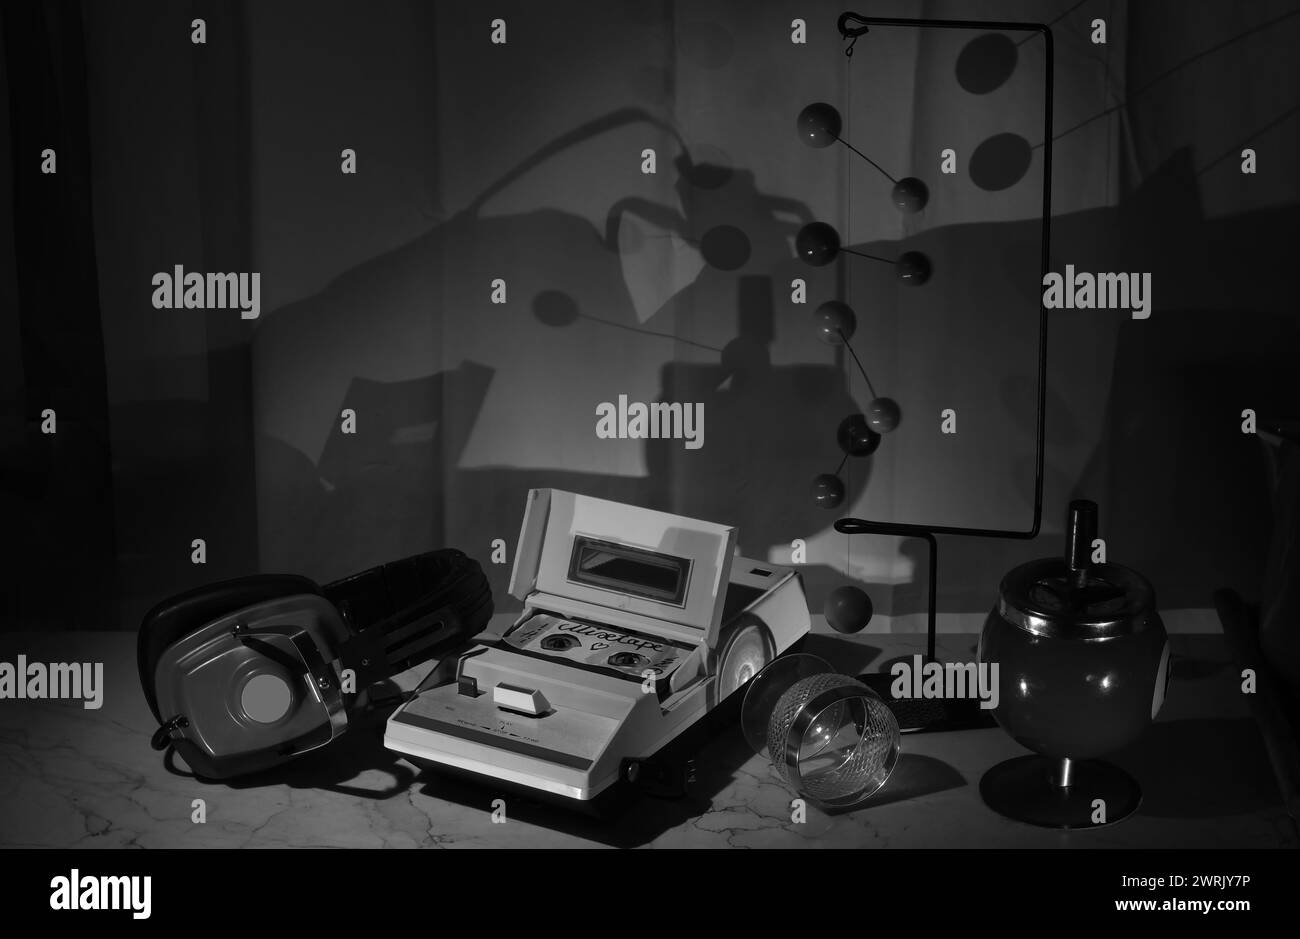 vintage cassette tape recorder and old headphone in a seventies objects arrangement.Black and white image. Stock Photo